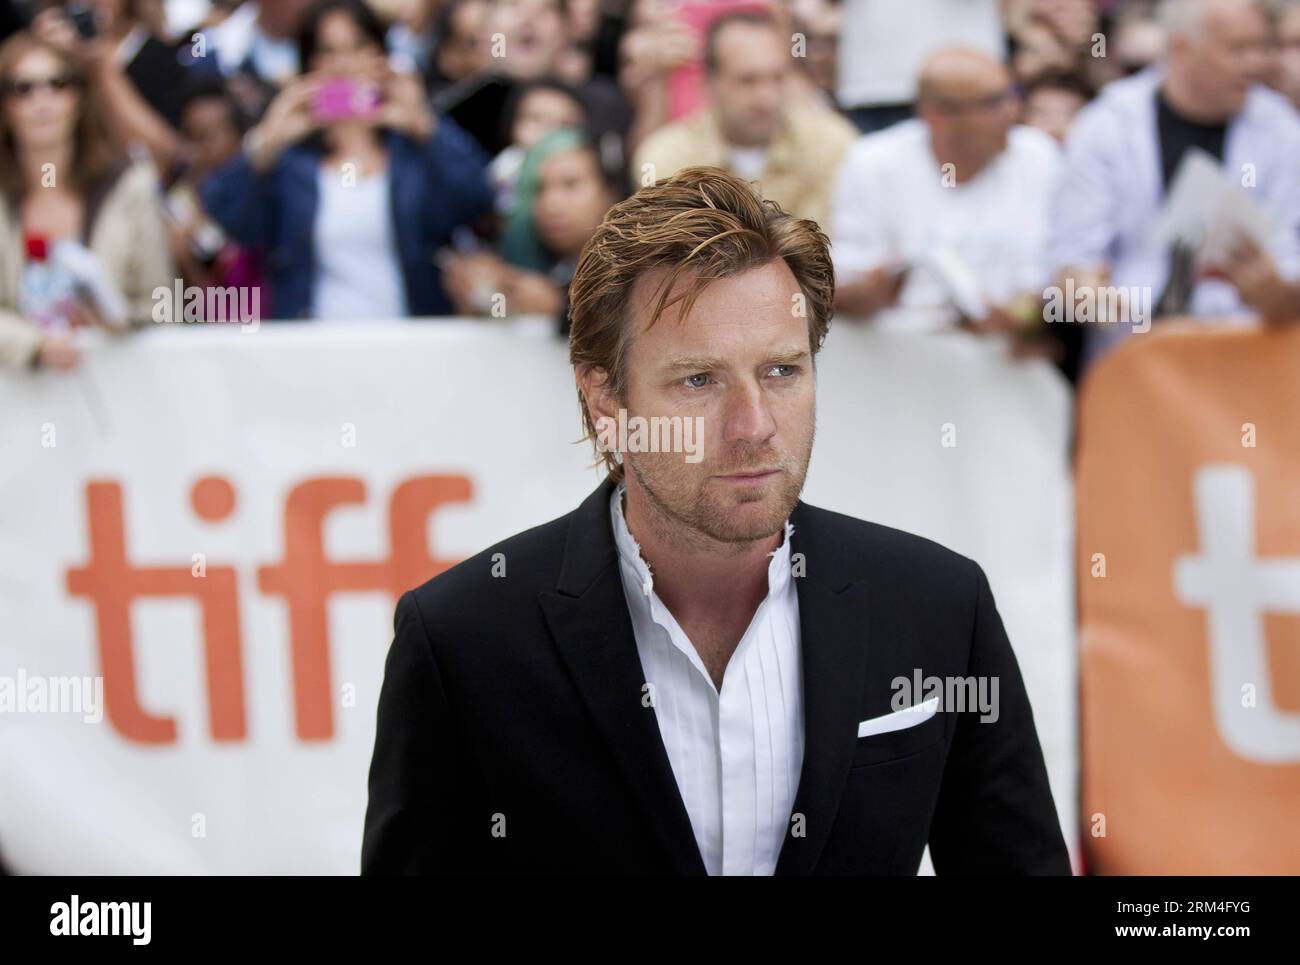 Bildnummer: 60454508  Datum: 09.09.2013  Copyright: imago/Xinhua (130910) -- TORONTO, (Xinhua) -- Actor Ewan McGregor attends the world premiere of the film August: Osage County during the 38th Toronto International Film Festival in Toronto, Canada, Sept. 9, 2013. (Xinhua/Zou Zheng) CANADA-TORONTO-FILM FESTIVAL- AUGUST:OSAGE COUNTY PUBLICATIONxNOTxINxCHN Entertainment People x0x xkg 2013 quer premiumd Mc Gregor     60454508 Date 09 09 2013 Copyright Imago XINHUA  Toronto XINHUA Actor Ewan McGregor Attends The World Premiere of The Film August Osage County during The 38th Toronto International Stock Photo